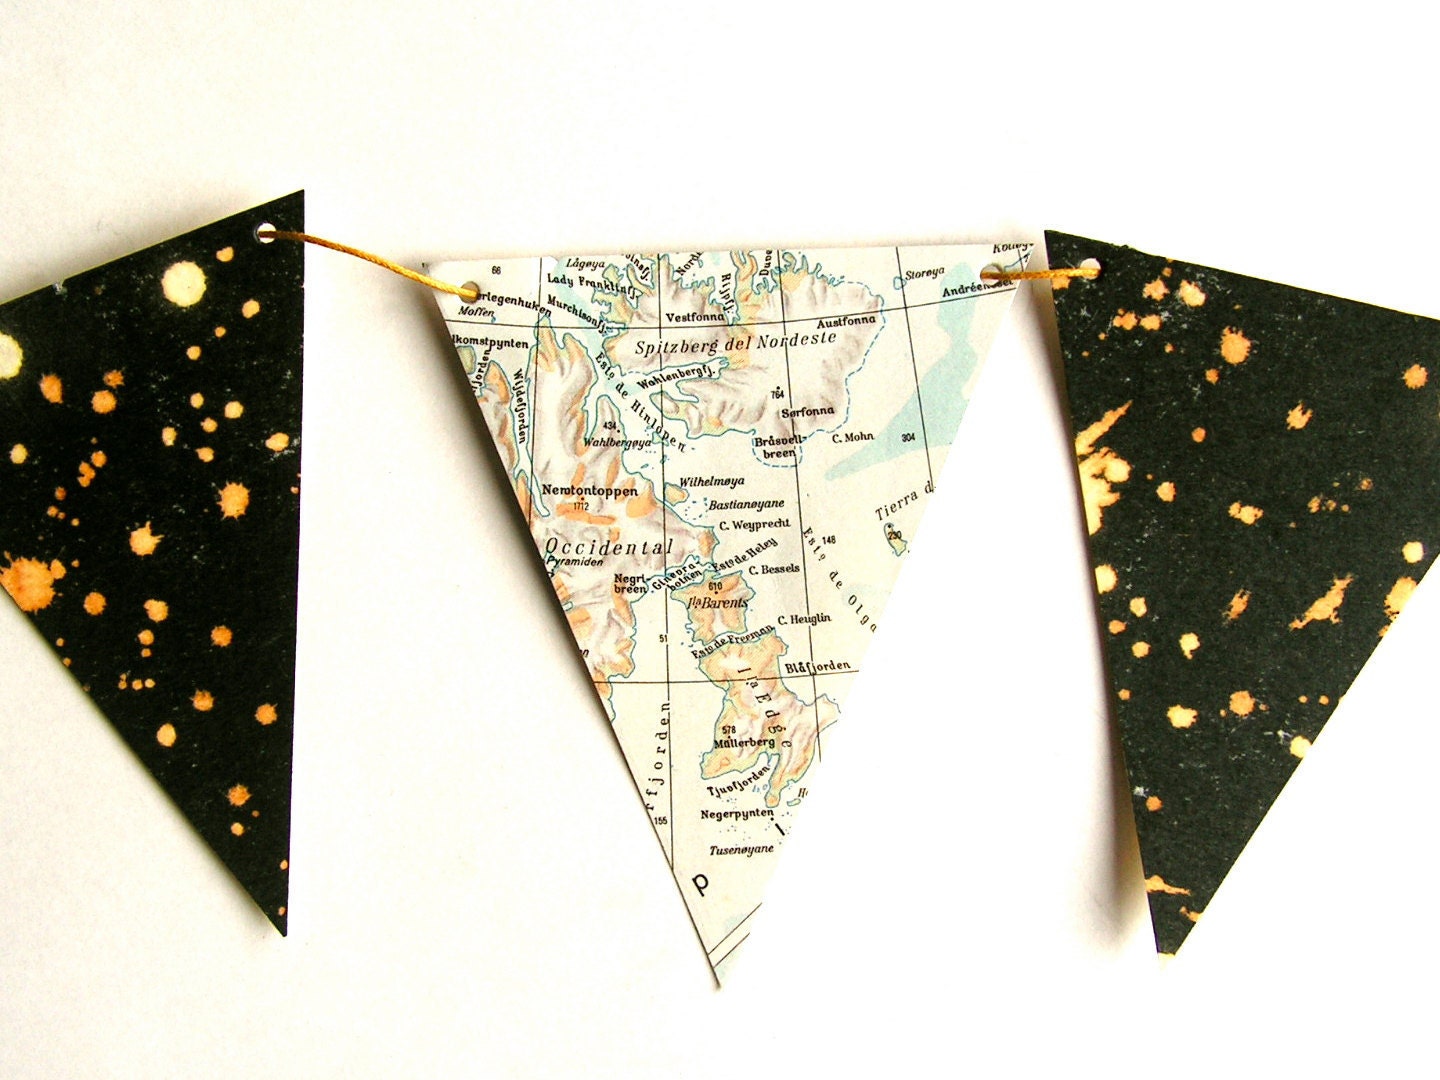 Vintage map and starry night bunting. Home decor. Bookshelf accent.